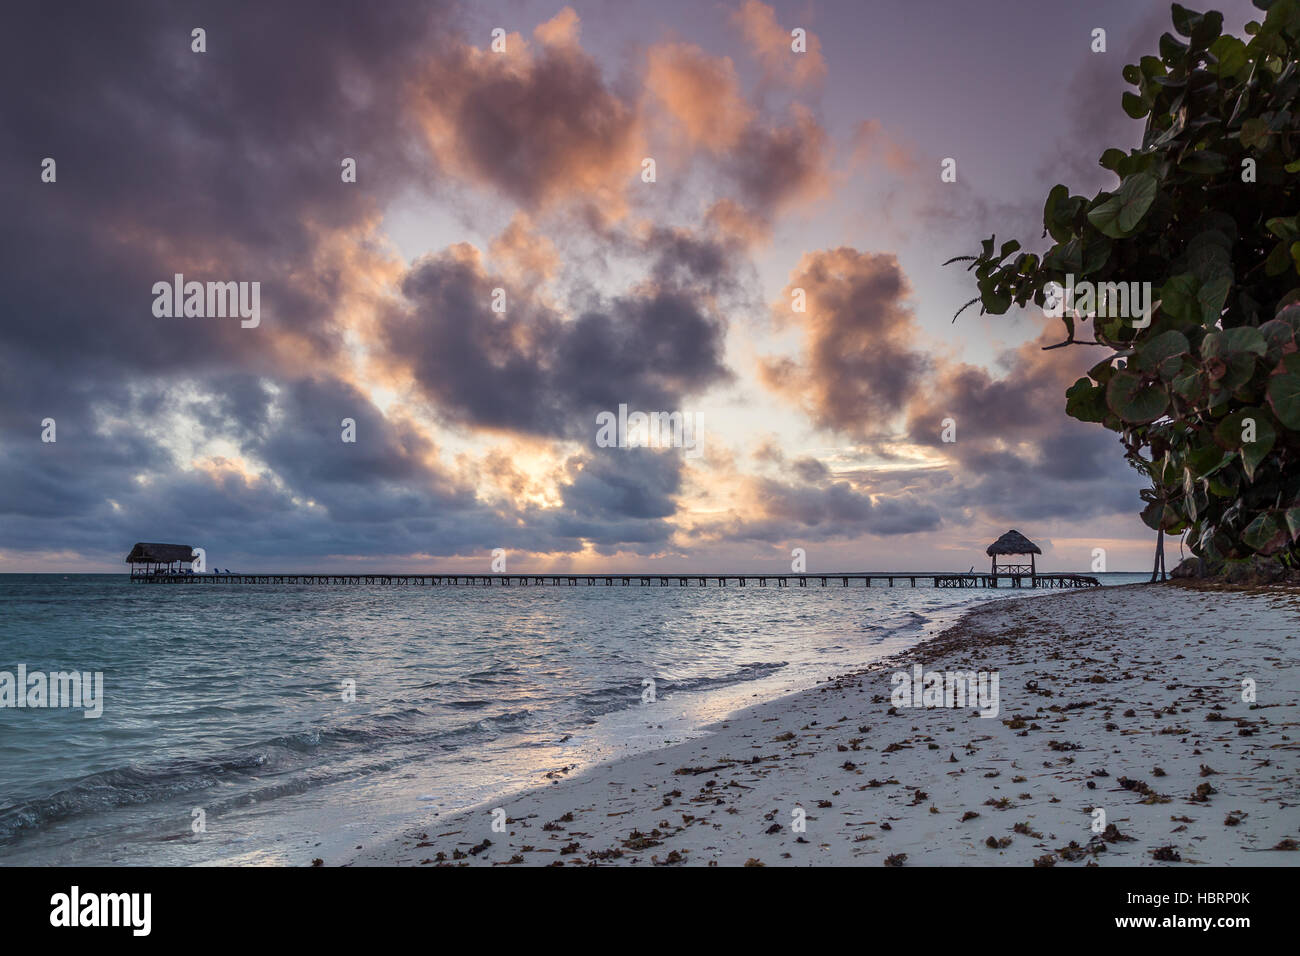 Clouds obscure the sun as it rises over the white sandy beach of Cayo Guillermo in Cuba early one morning. Stock Photo